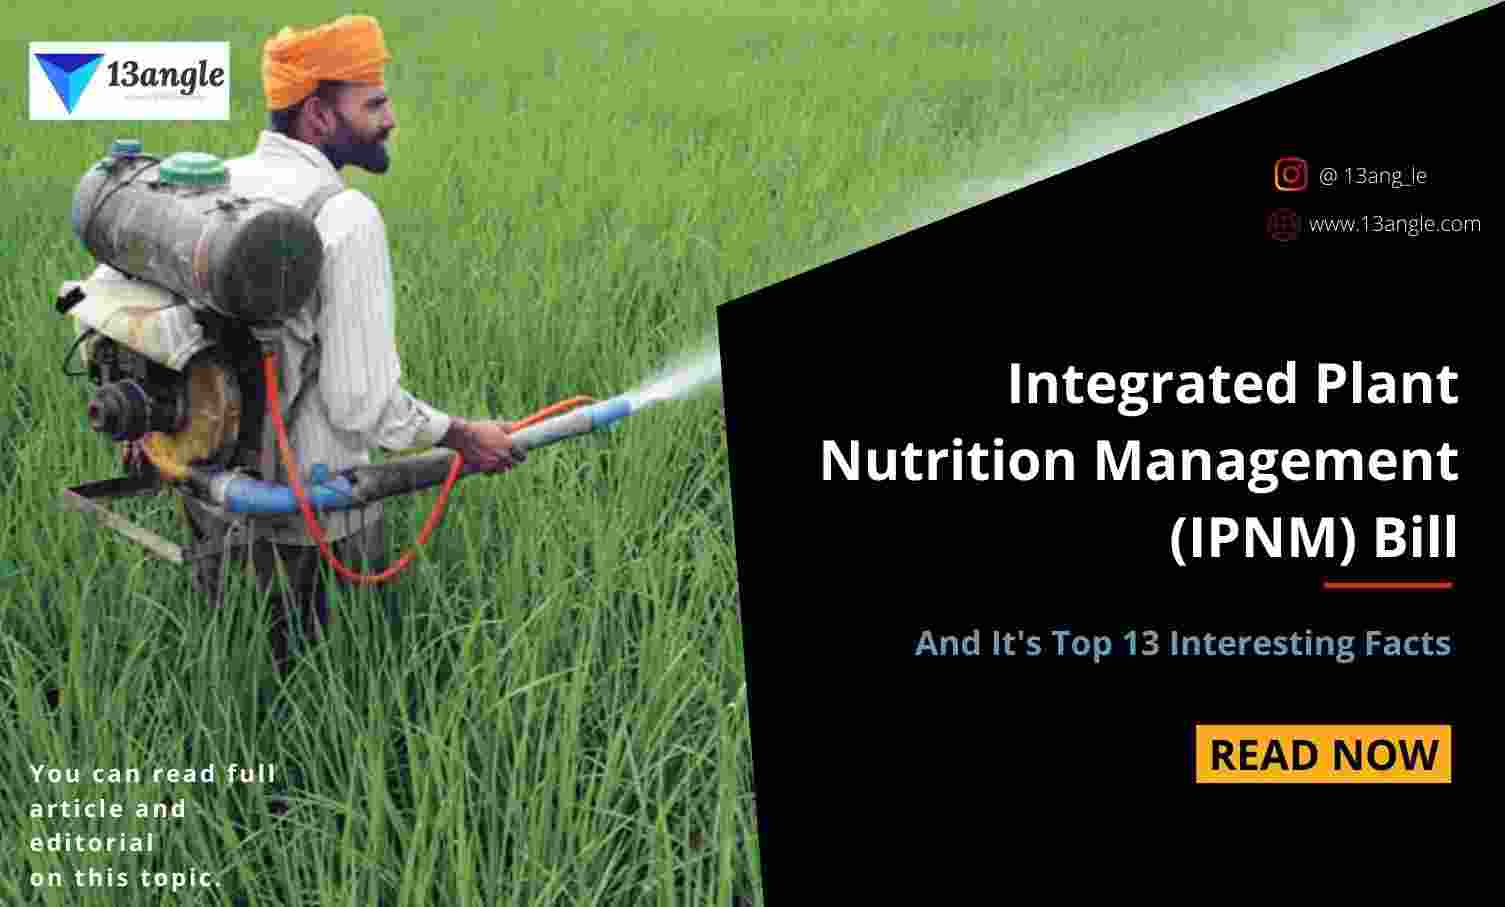 Integrated Plant Nutrition Management (IPNM) Bill- 13angle.com